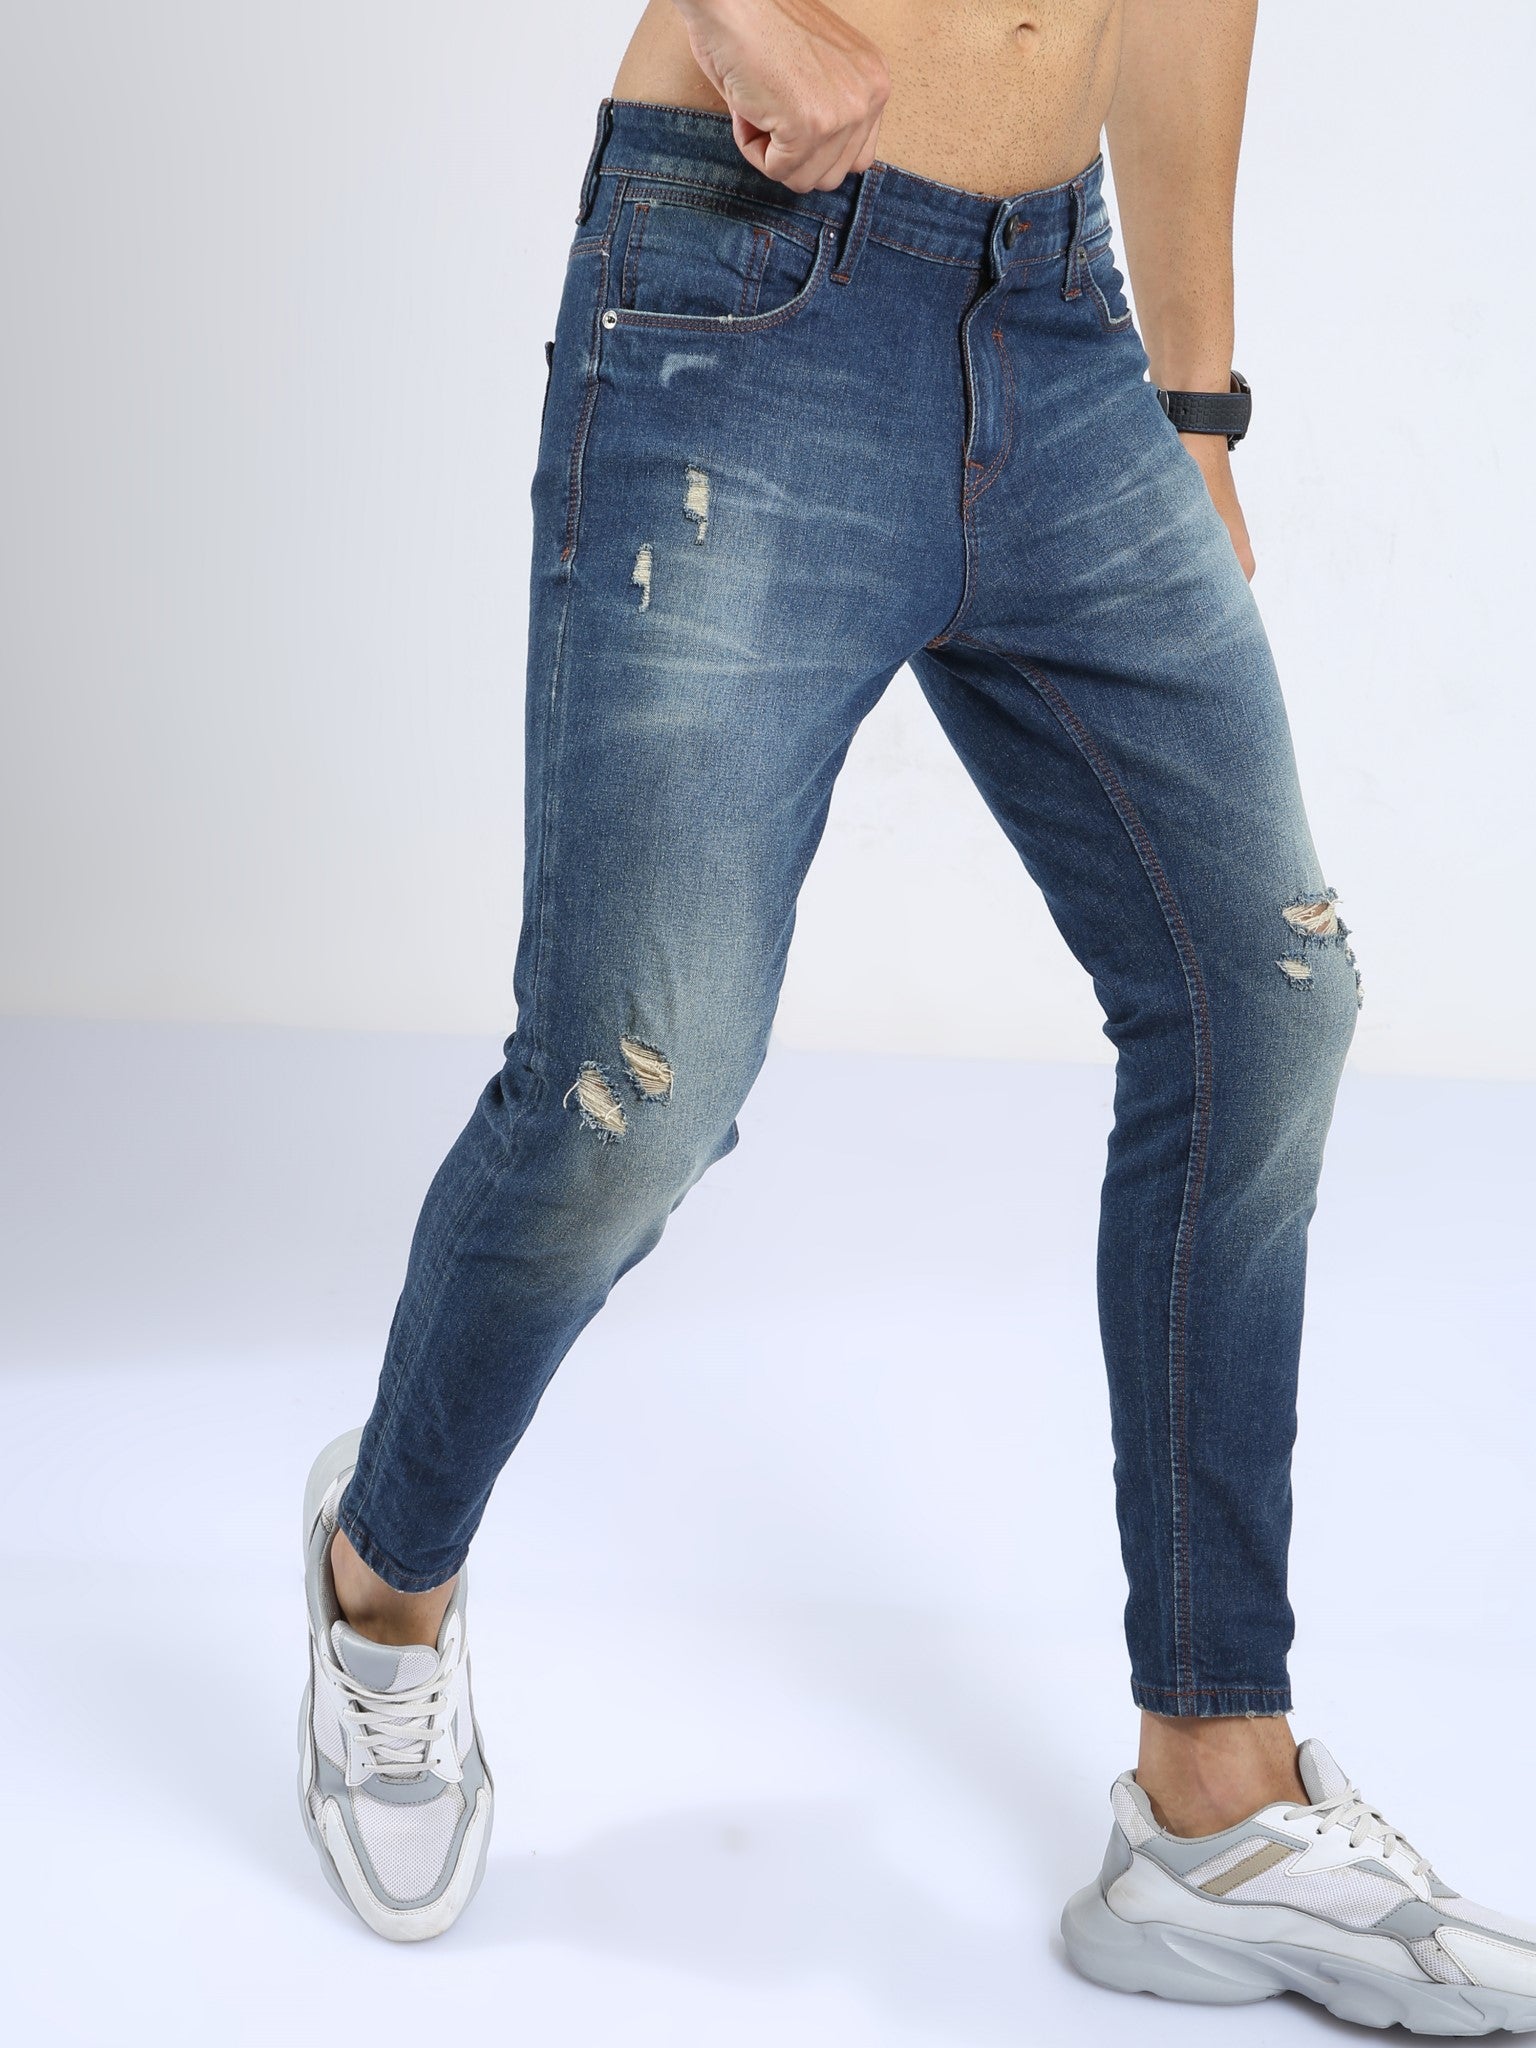 Rex Authentic Blue Skinny Jeans